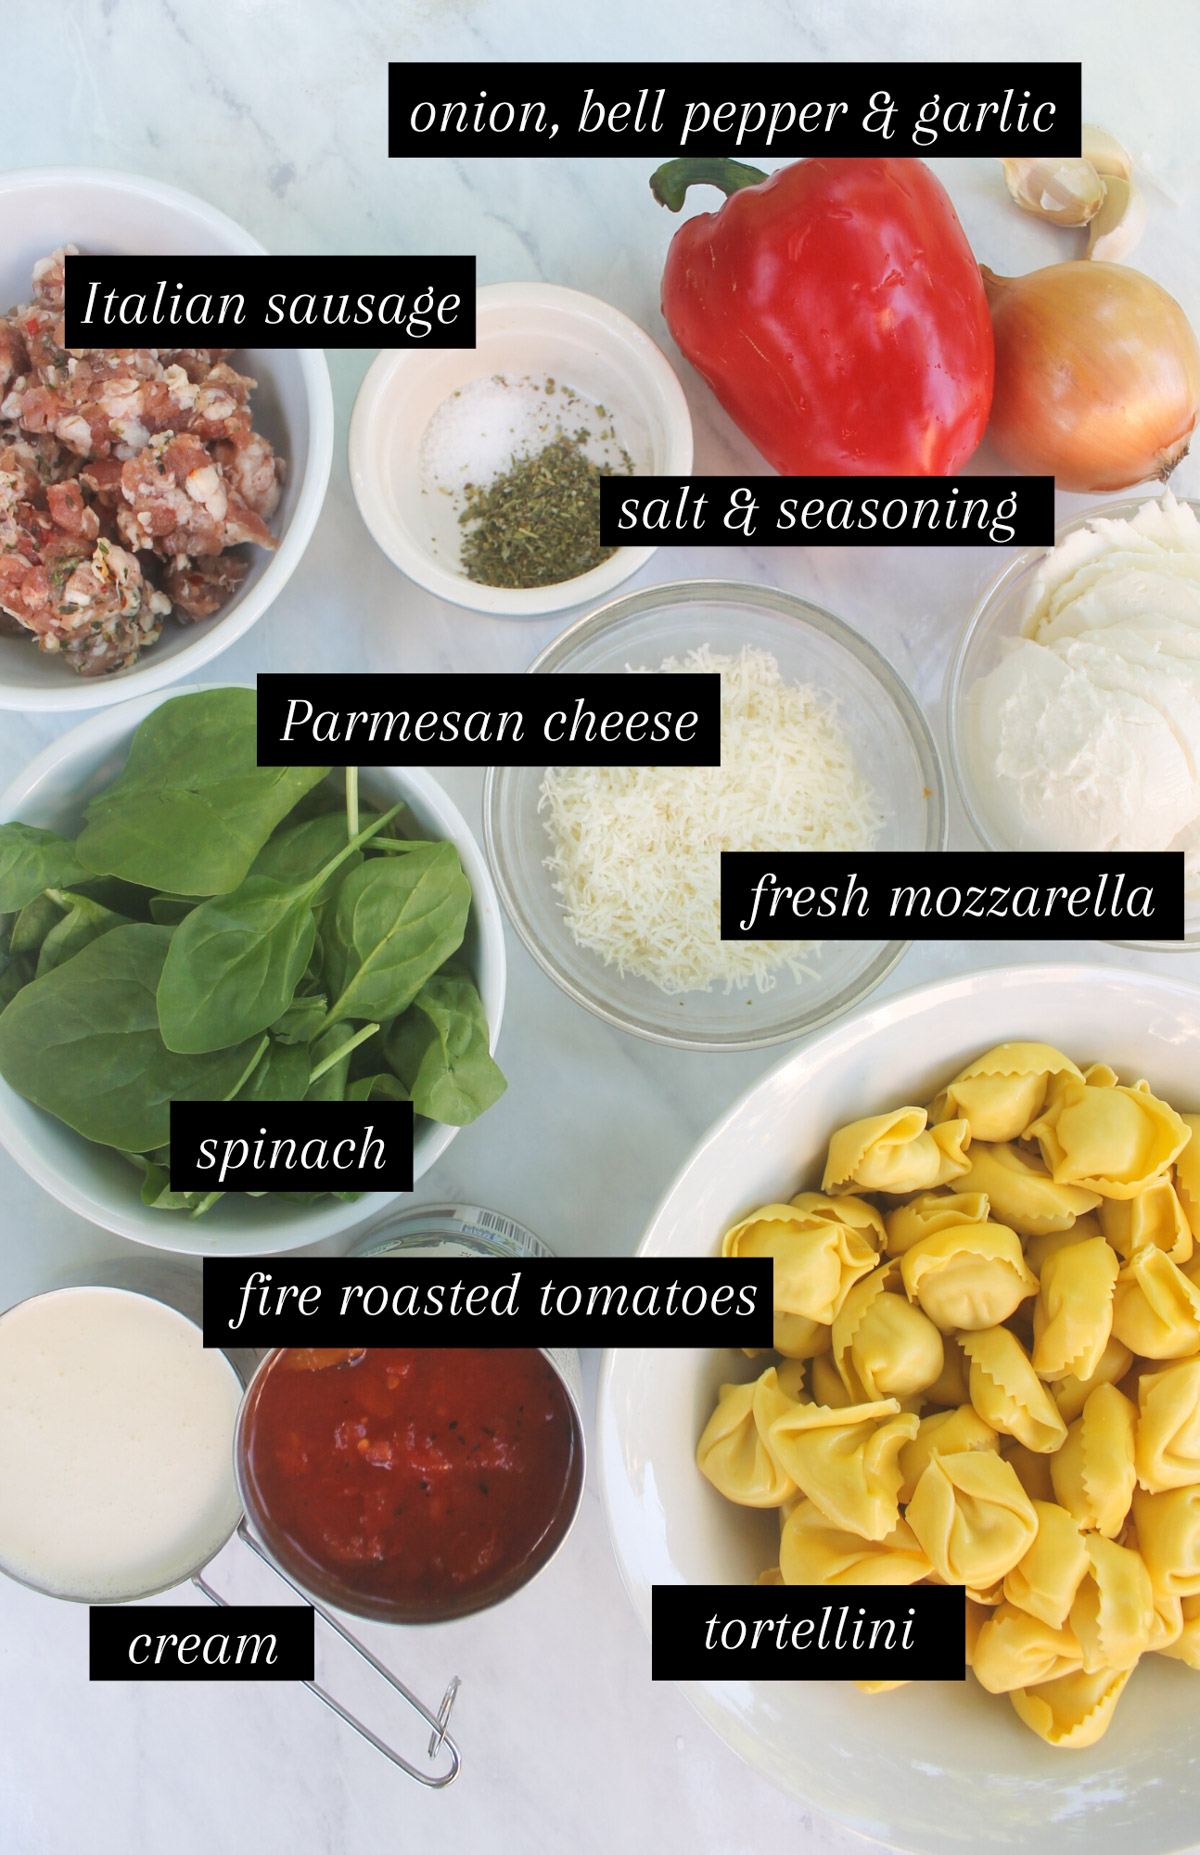 Labeled ingredients for One Pot Baked Tortellini.